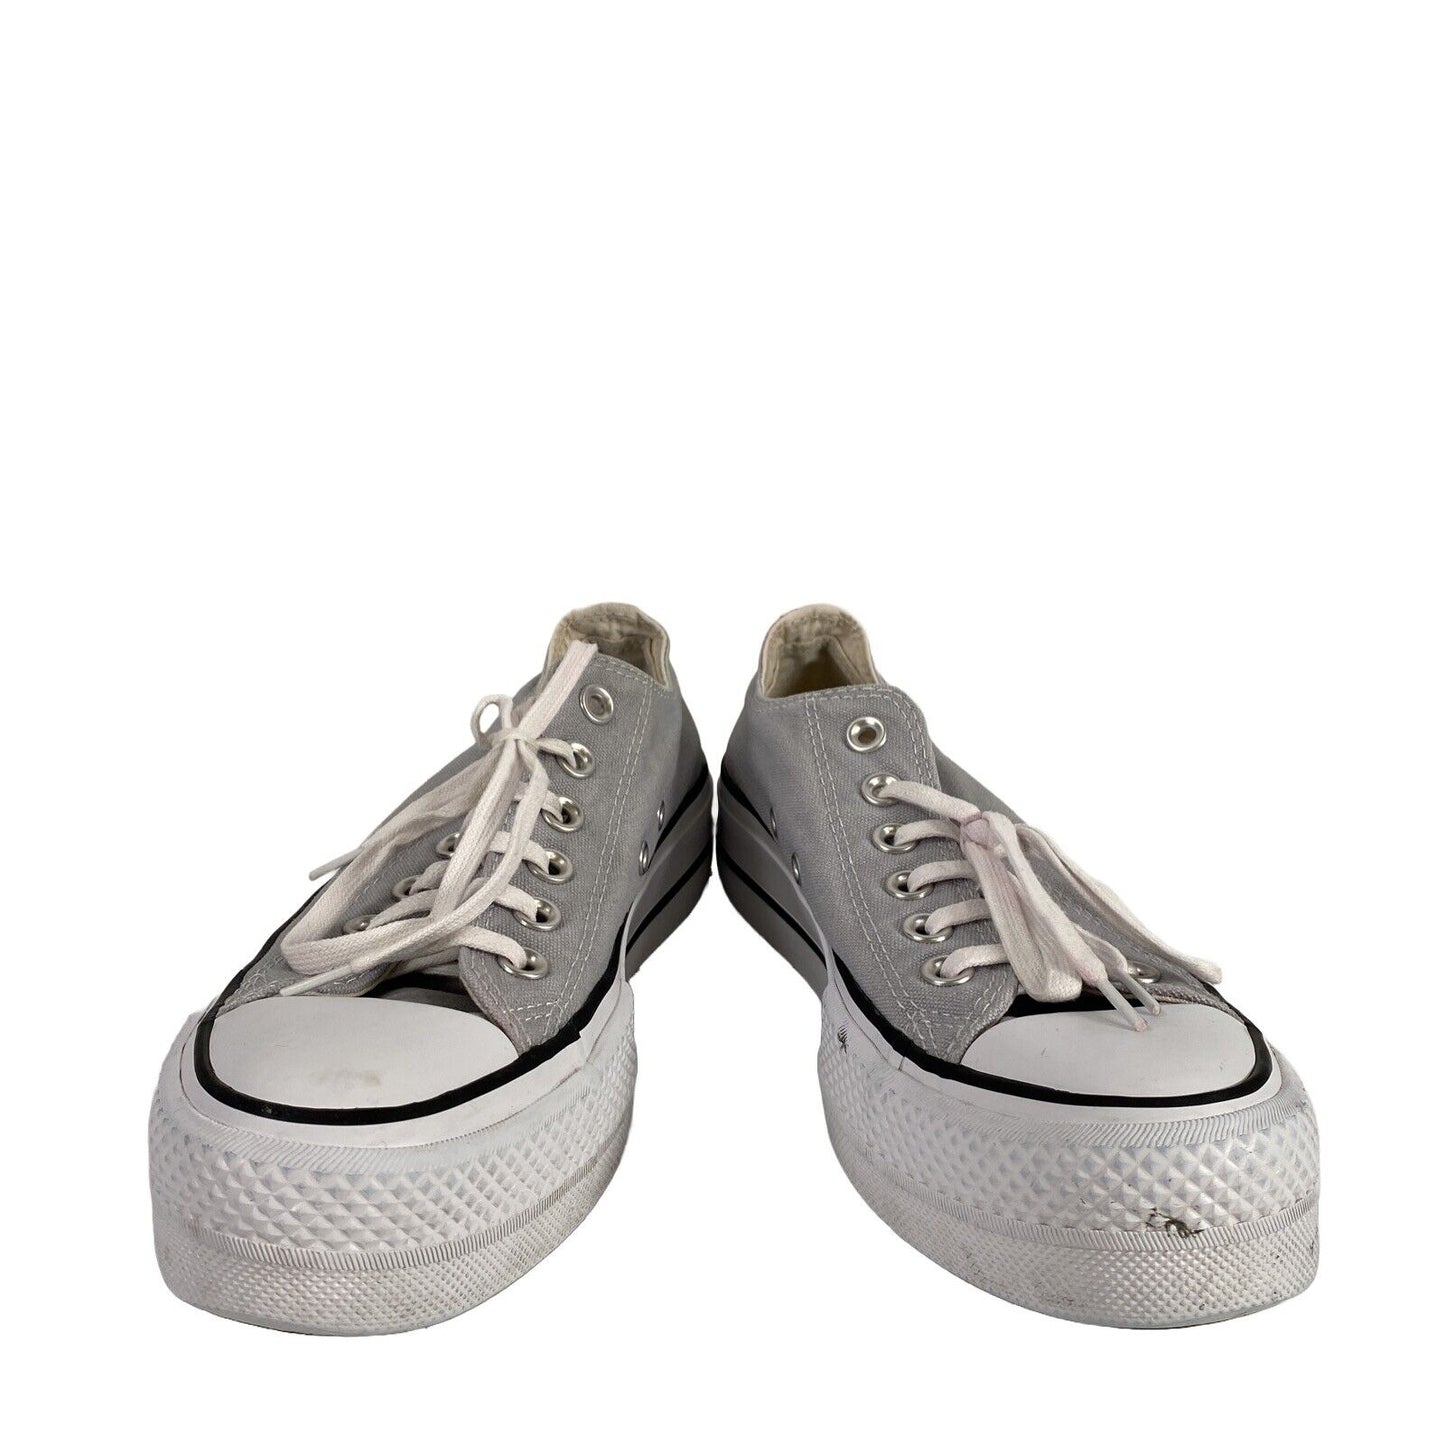 Converse All Star Women's Gray Canvas Lace Up Platform Sneakers - 6